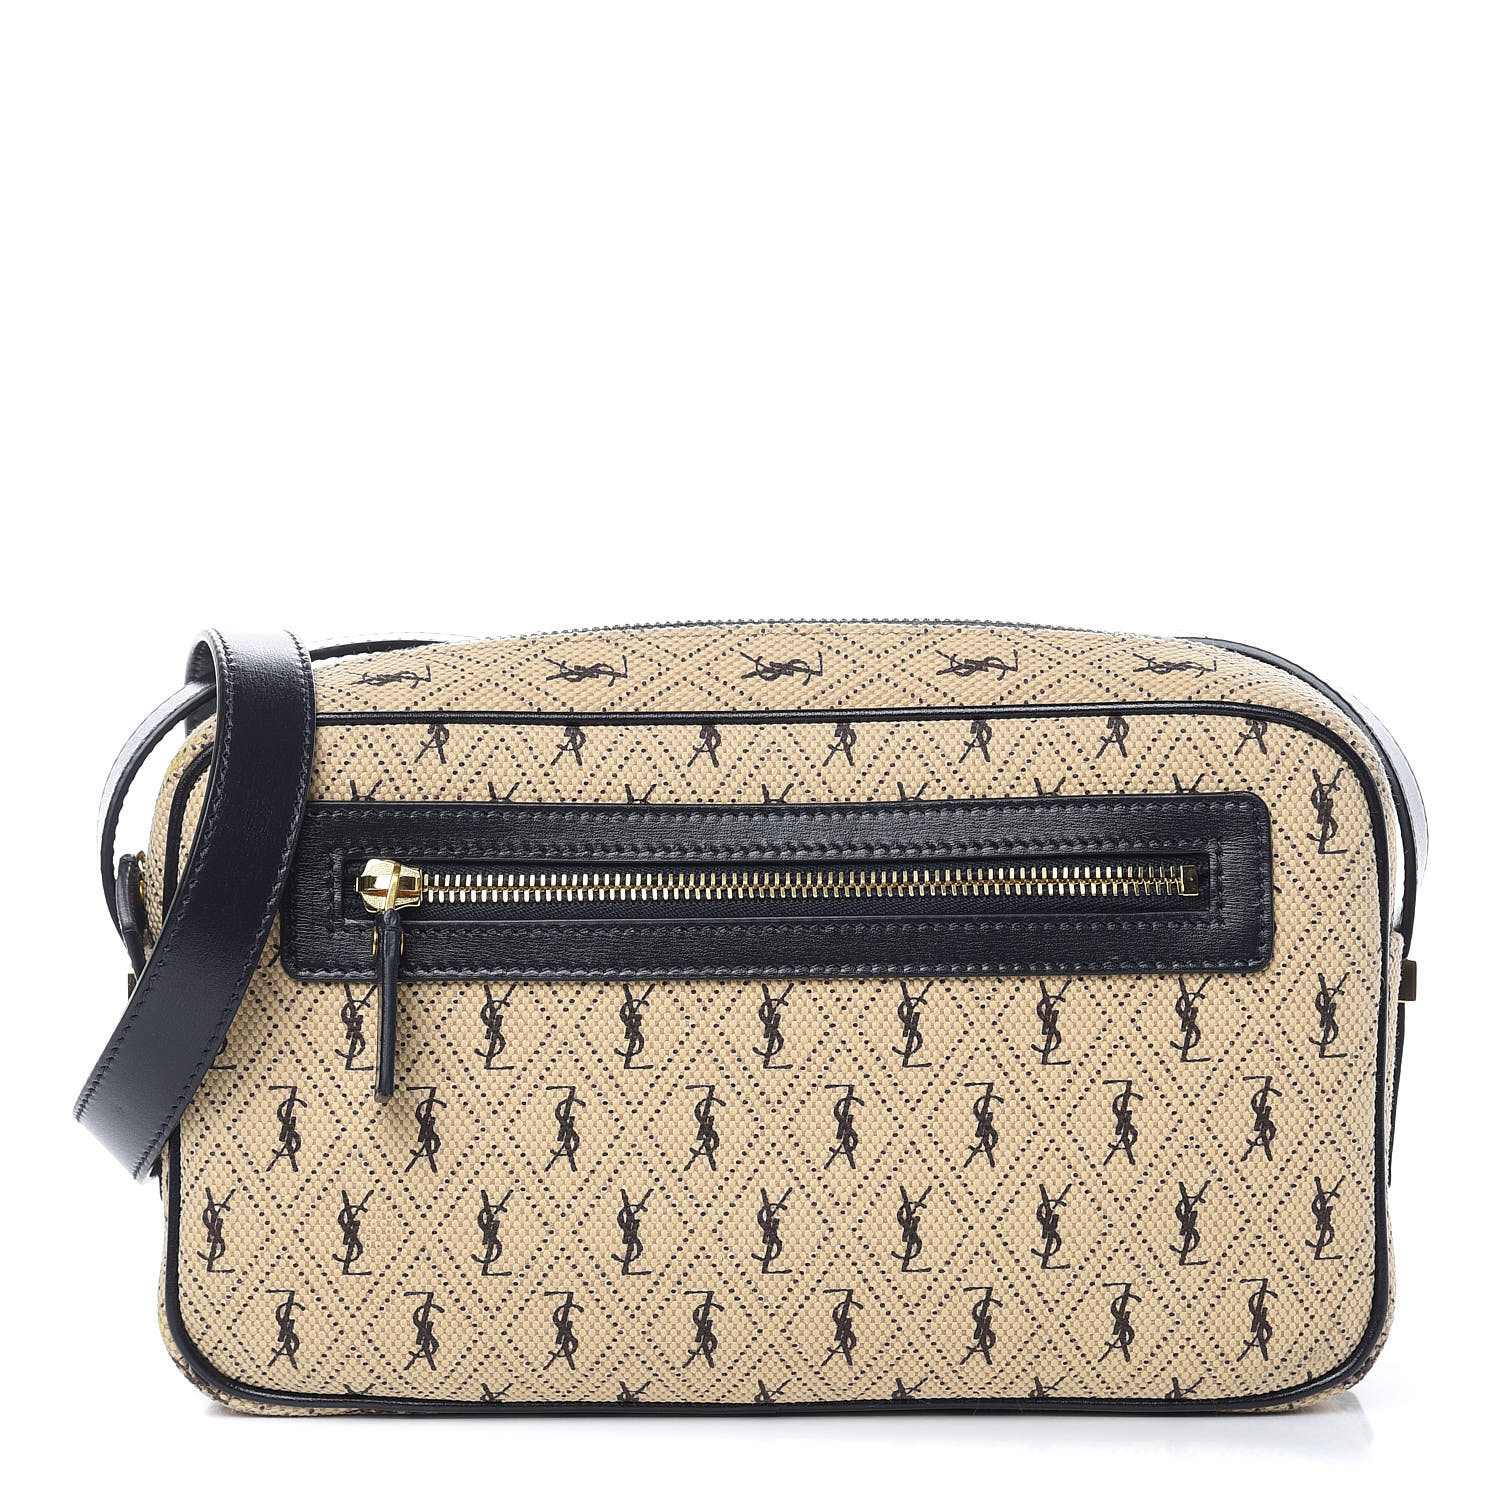 Cross body bags Saint Laurent - Monogram all over small patent leather bag  - 5686041EJ1D1000